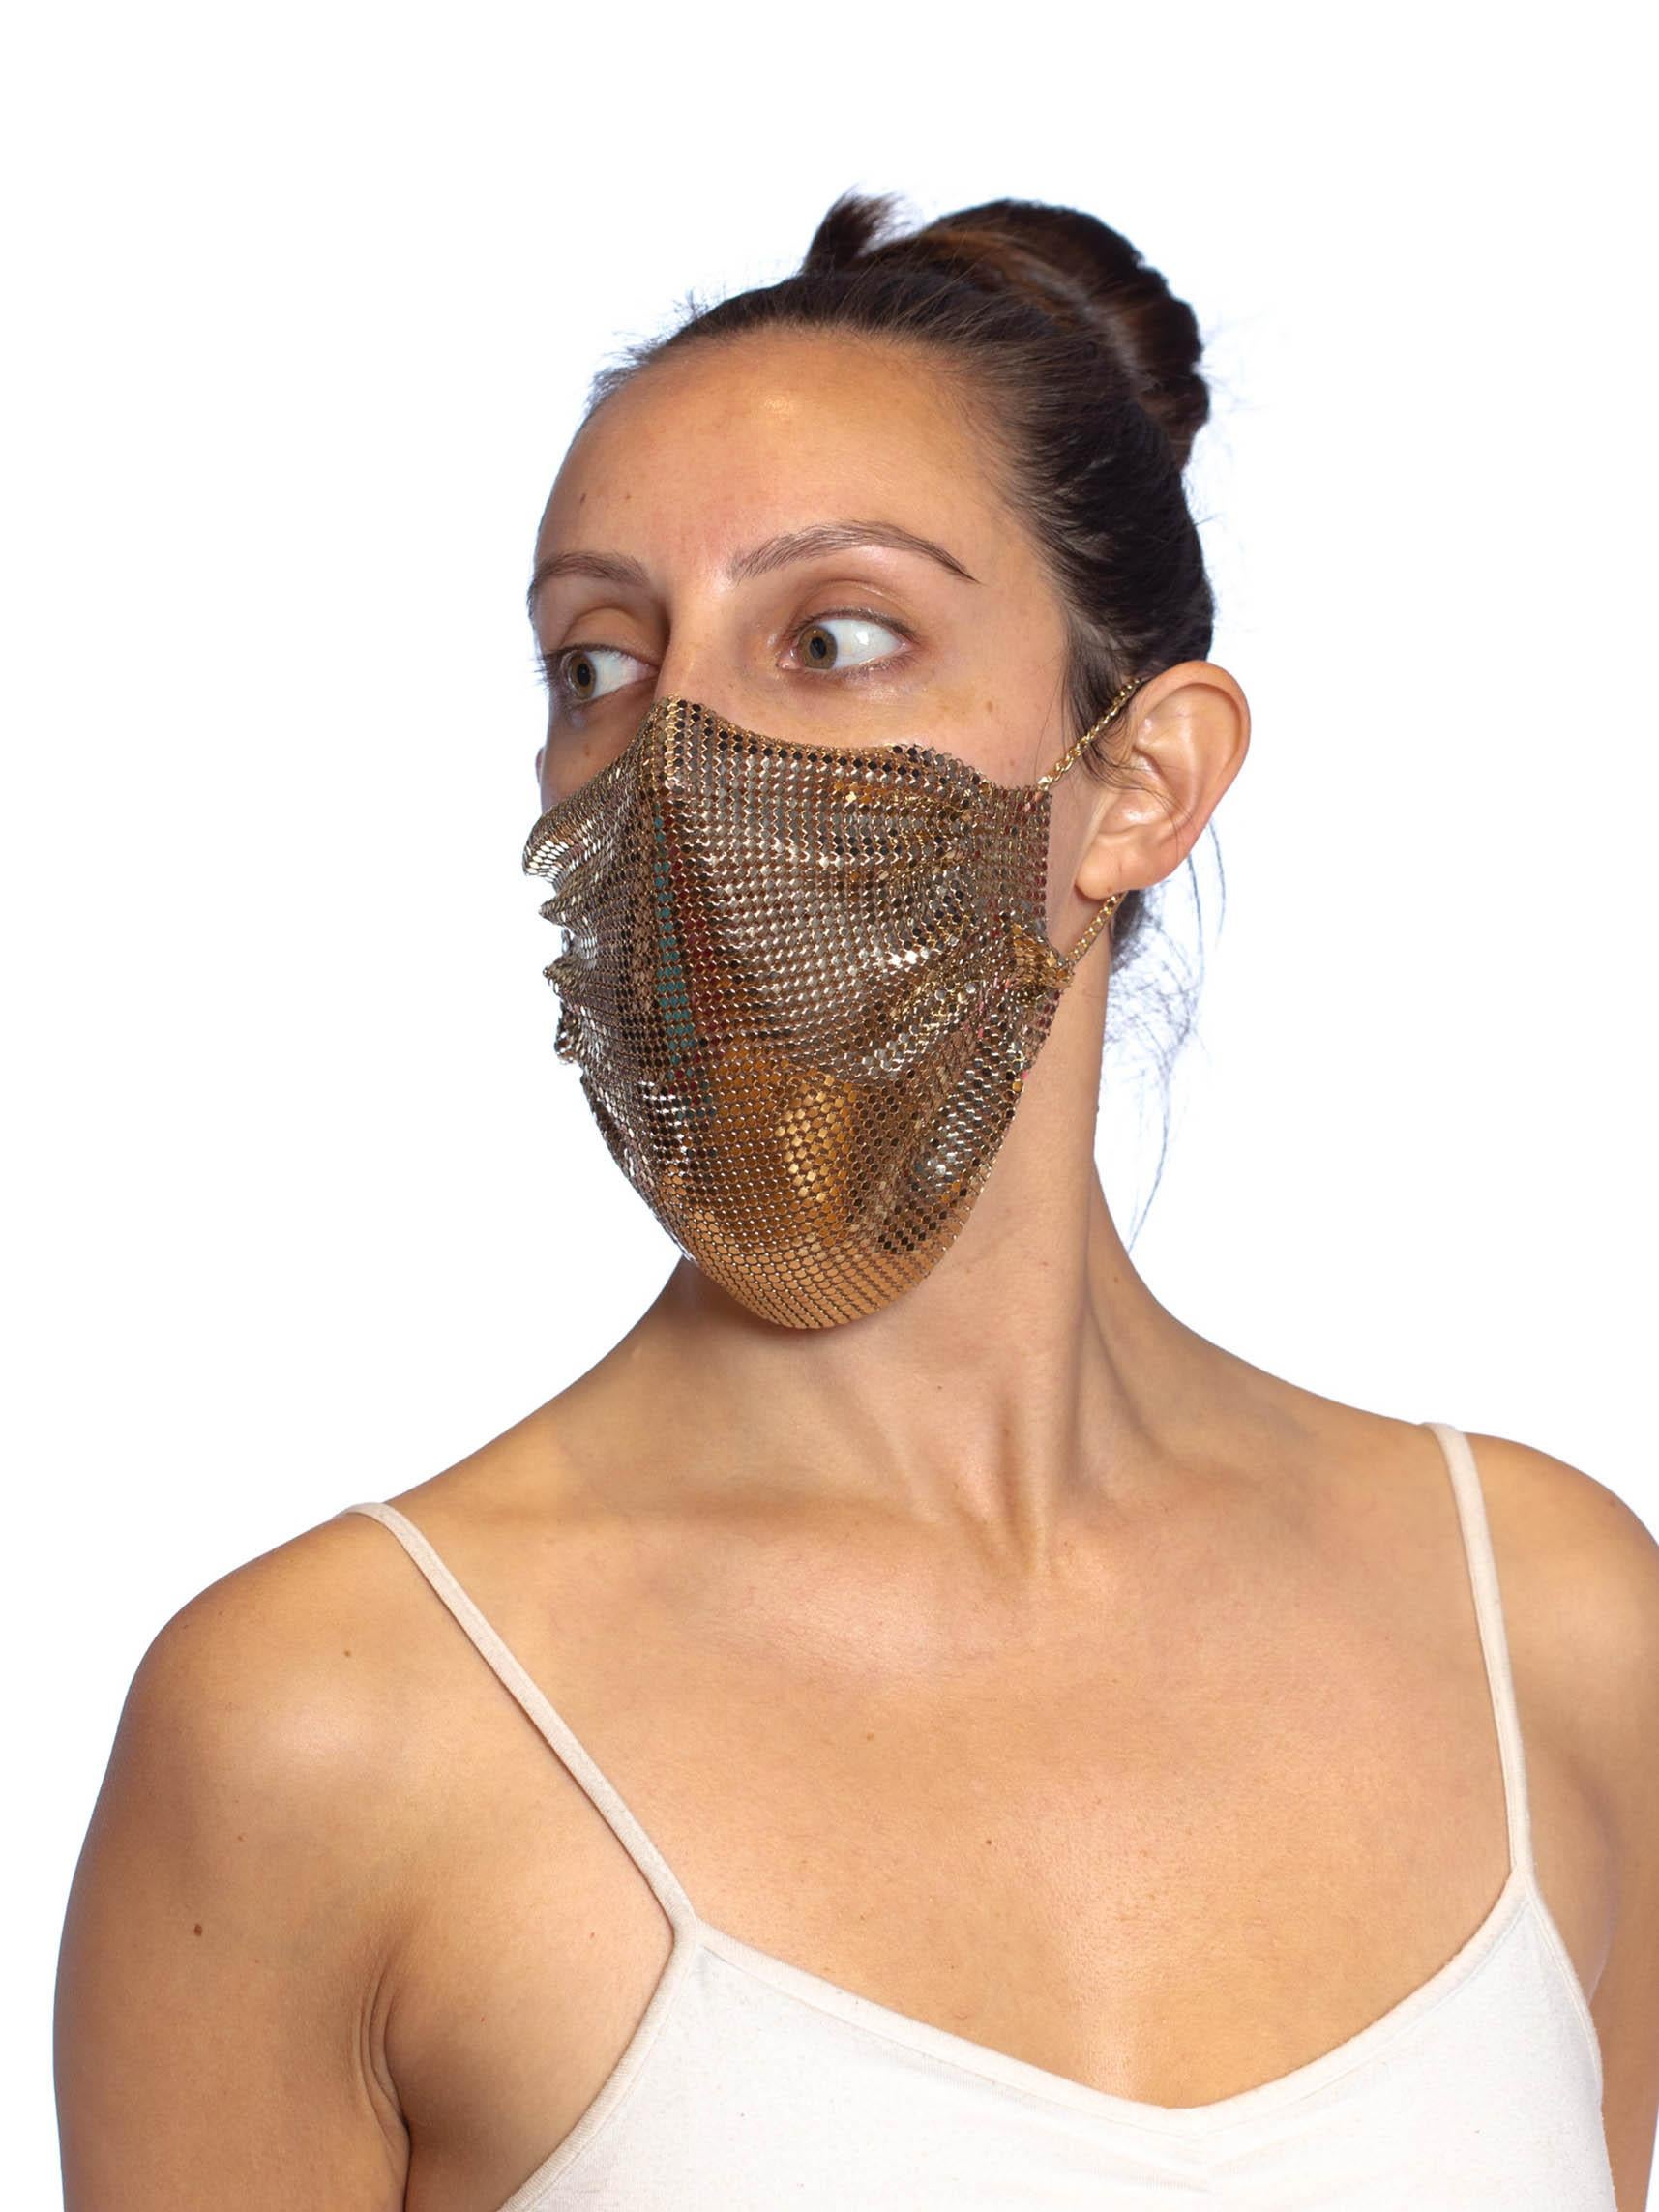 MORPHEW COLLECTION Gold Metal Mesh Scarf Mask
MORPHEW COLLECTION is made entirely by hand in our NYC Ateliér of rare antique materials sourced from around the globe. Our sustainable vintage materials represent over a century of design, many of the